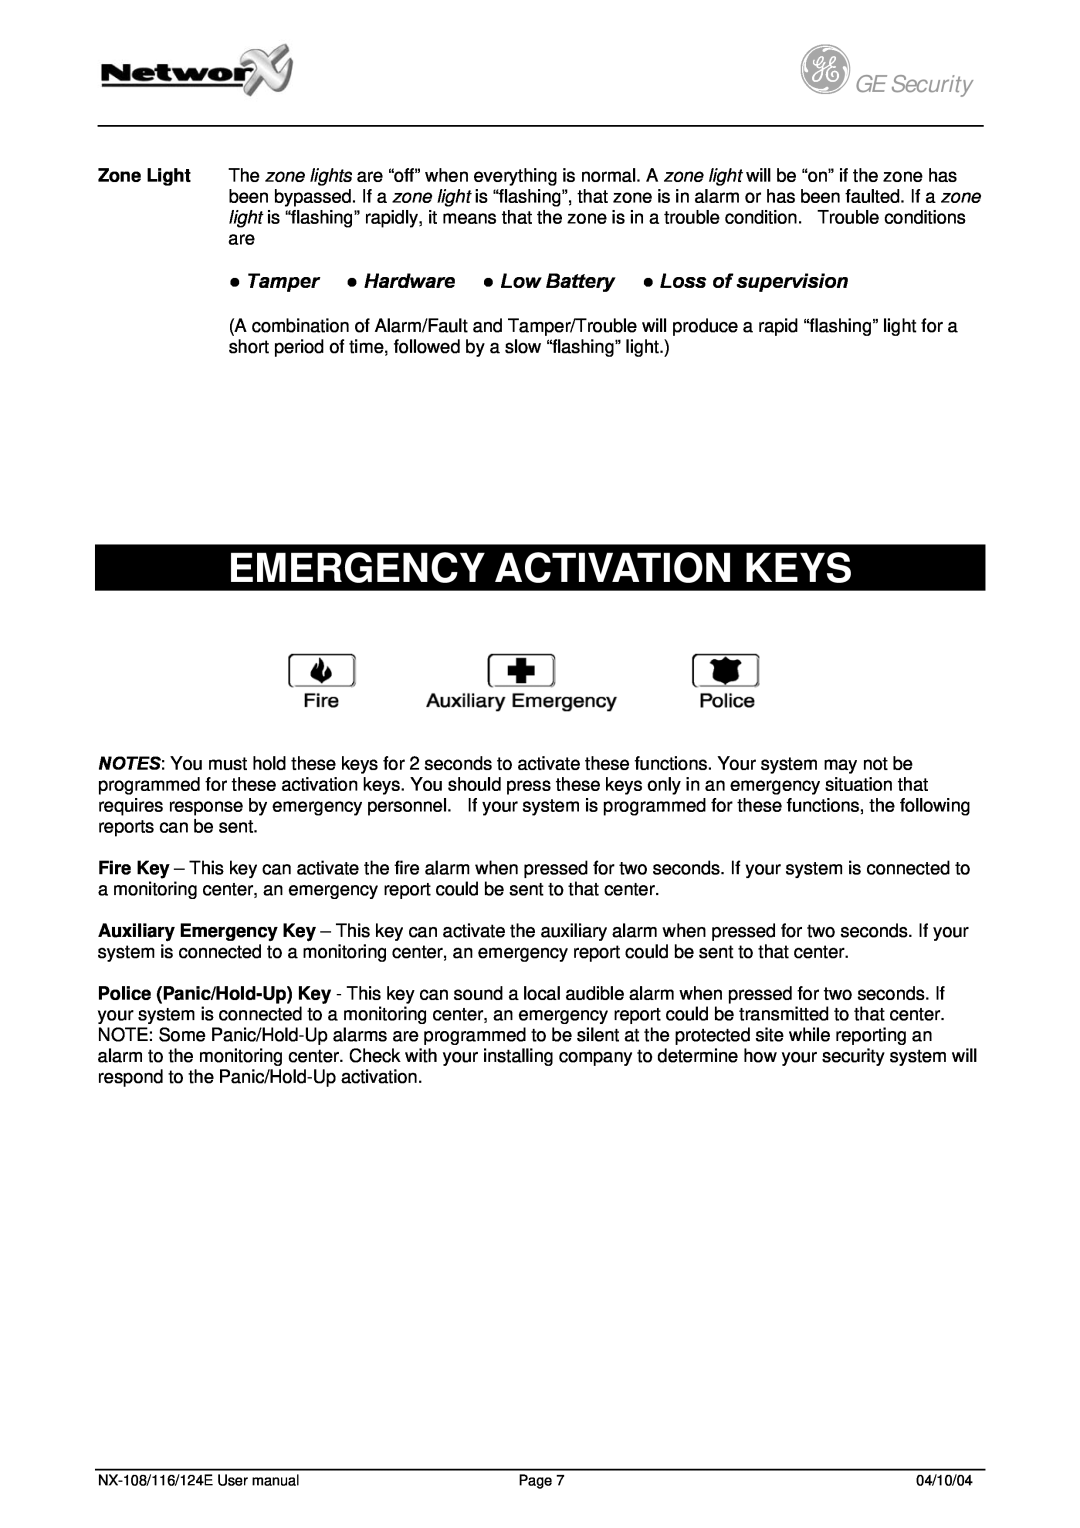 GE NX-108/116/124E user manual Emergency Activation Keys, gGE Security 